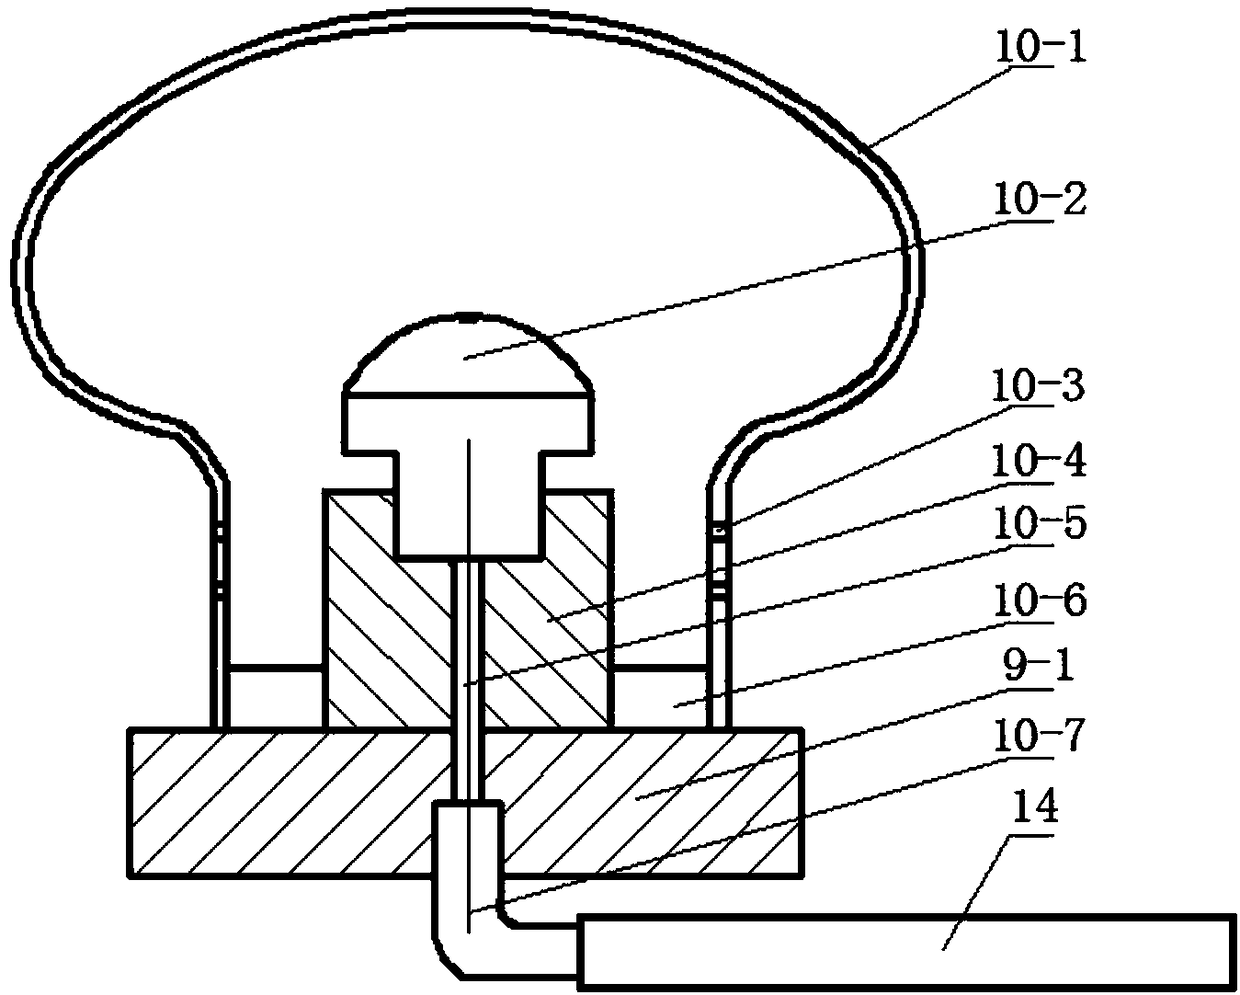 Liquid fuel gasification combustor suitable for mixed alcohol oil and capable of achieving complete combustion